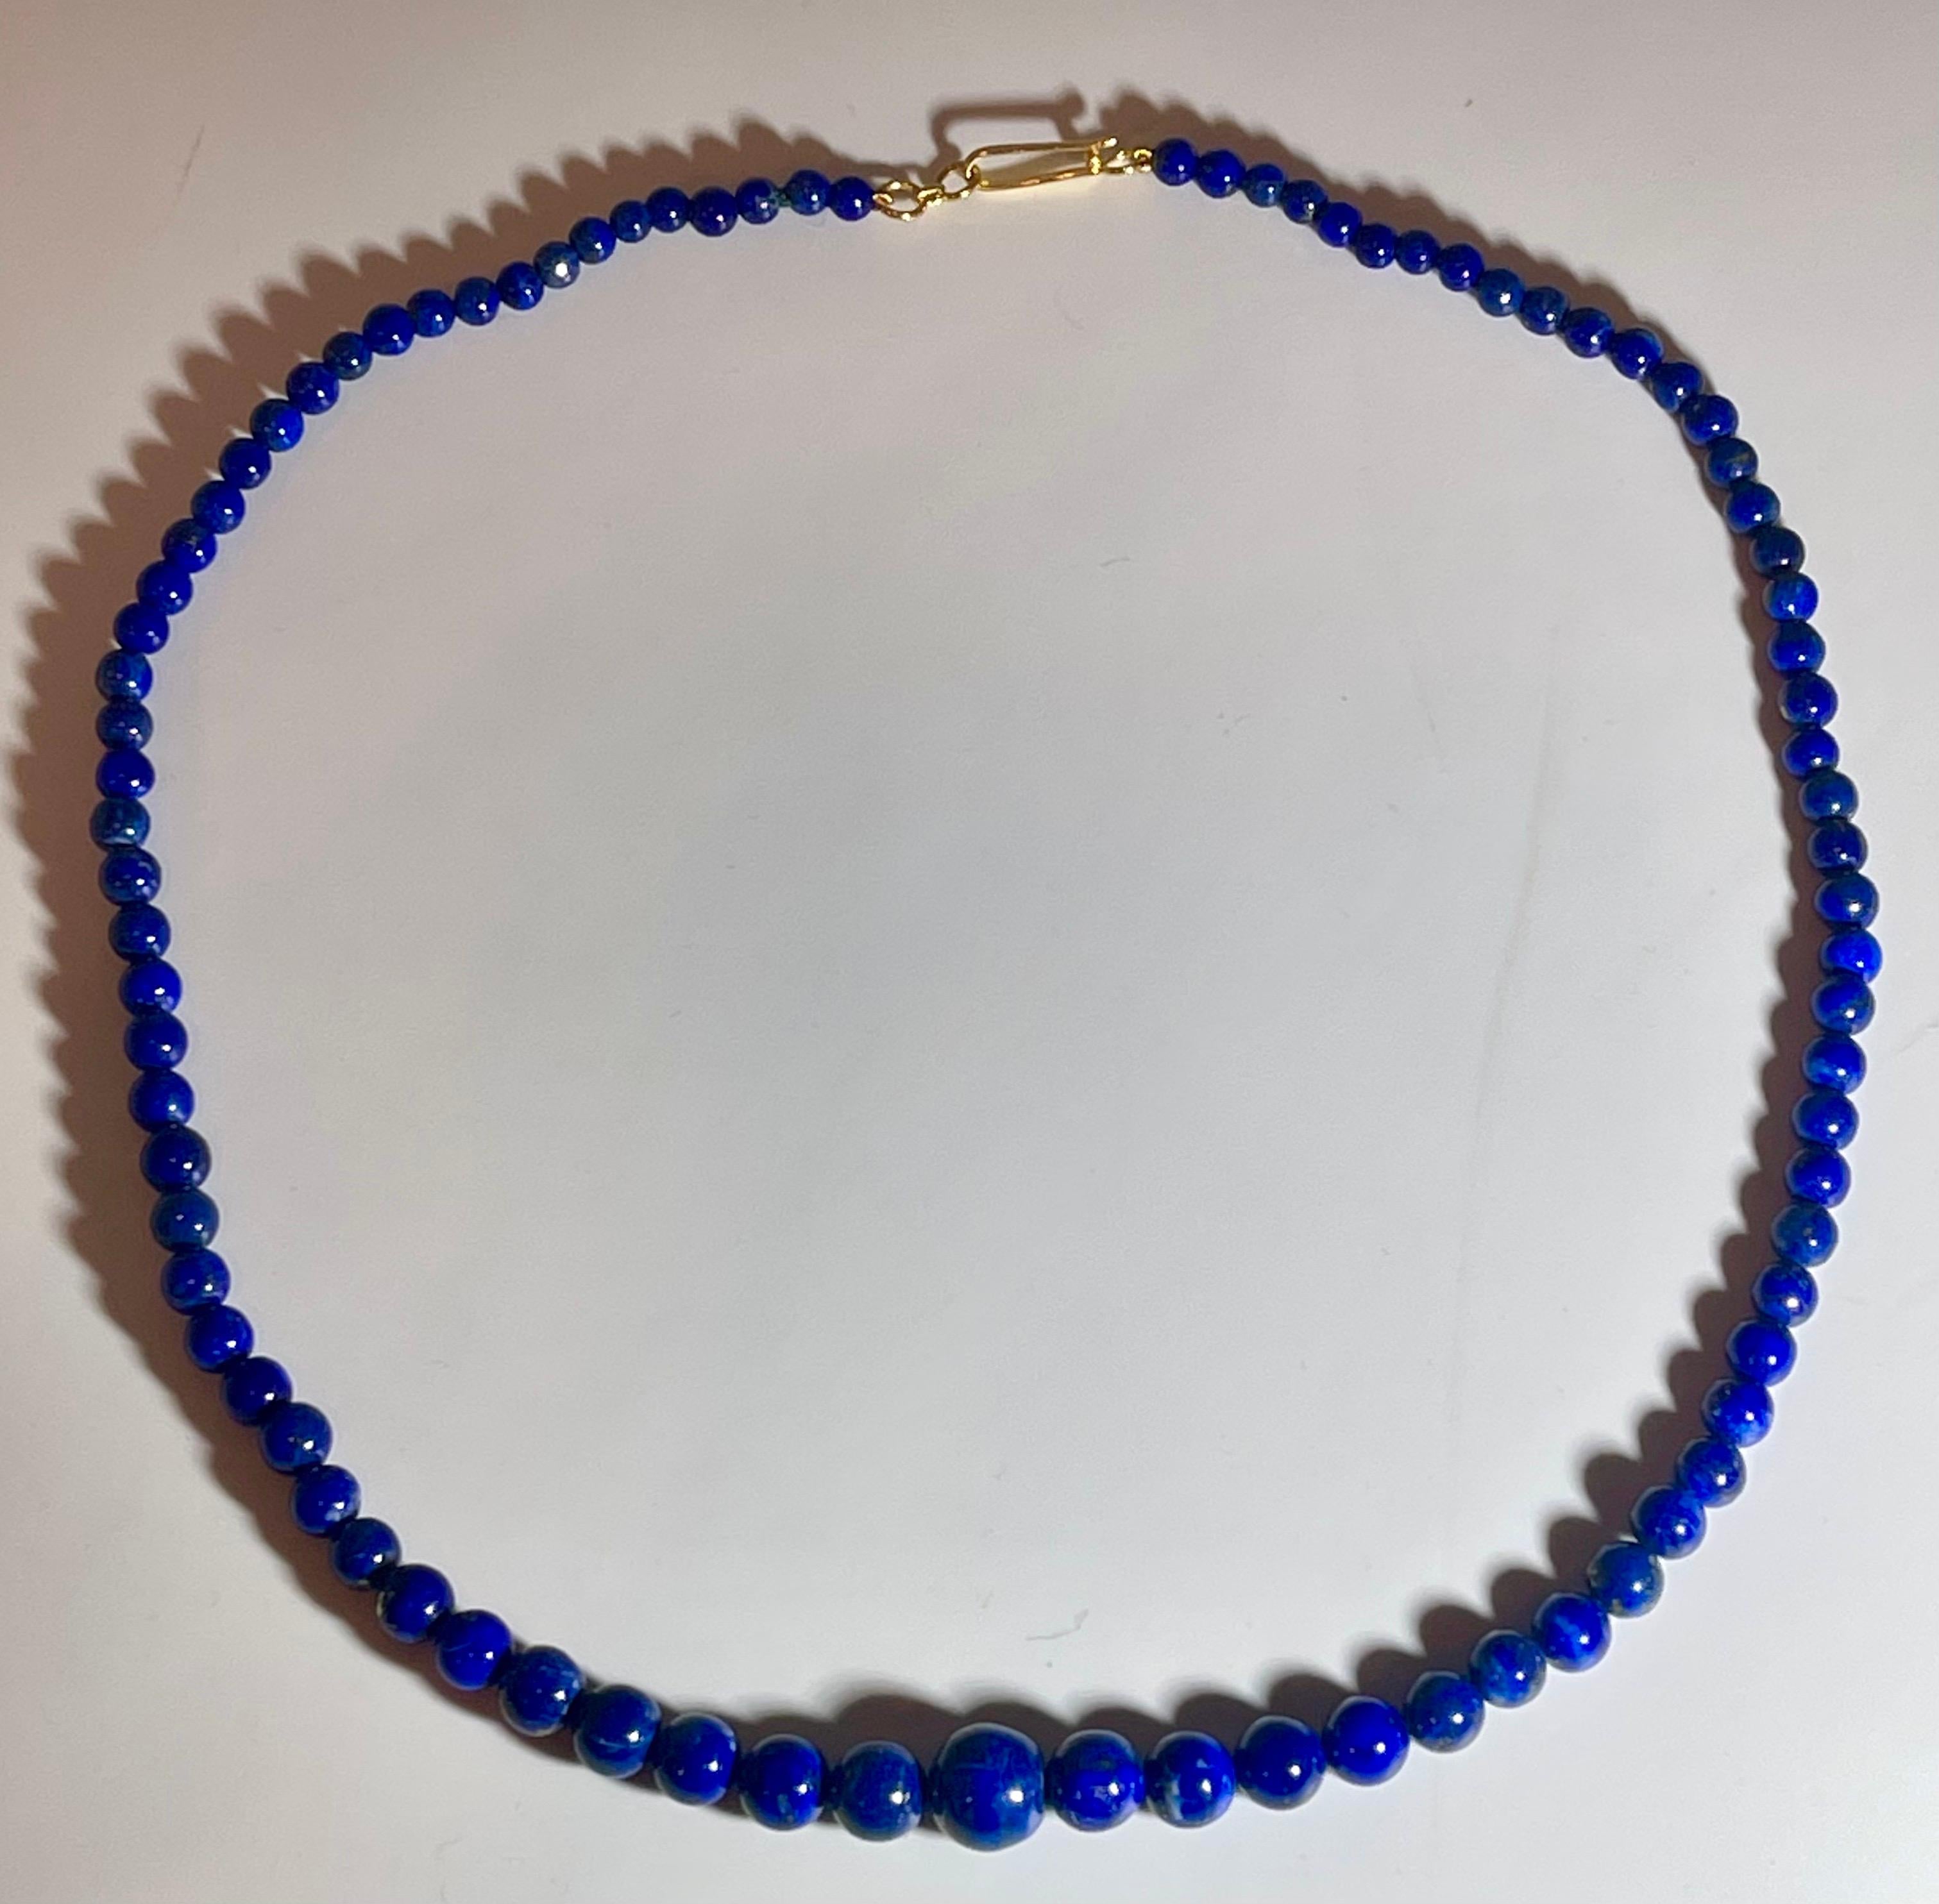 Round Cut Vintage Lapis Lazuli Single Strand Necklace with 14 Karat Yellow Long Hook Clasp For Sale